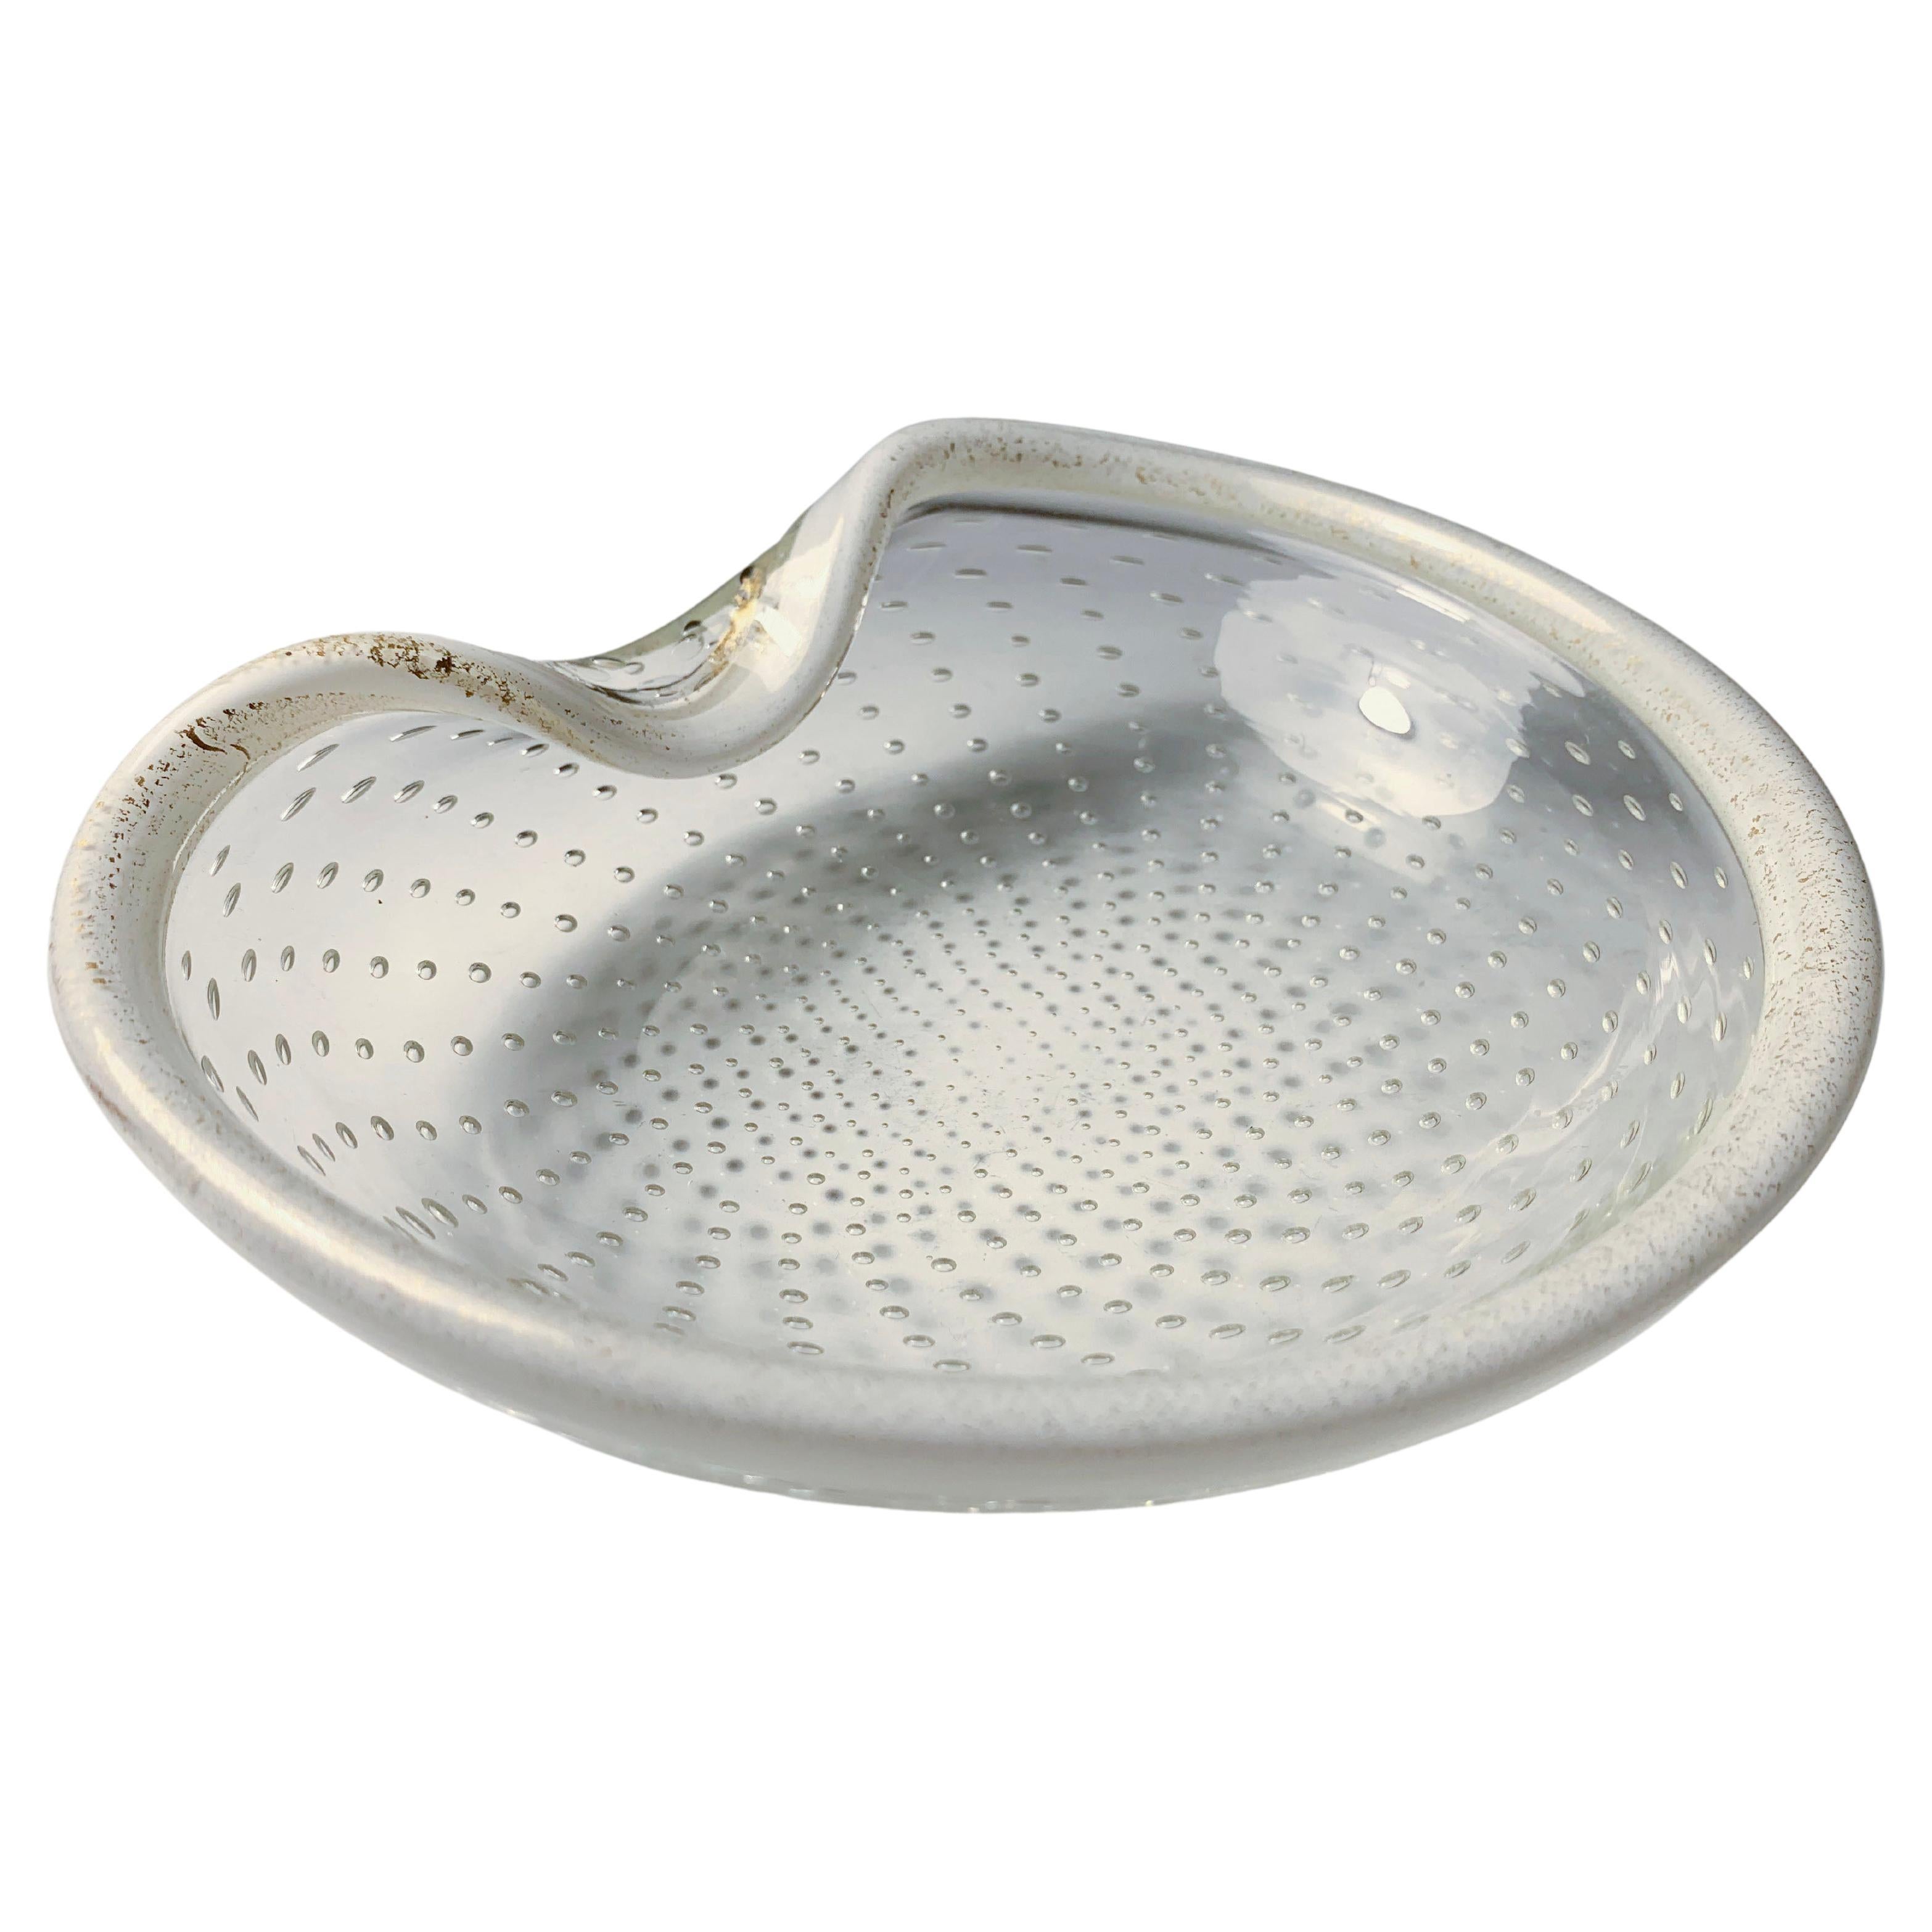 Murano Controlled Bubble Glass Bowl / Ashtray by Barovier & Toso